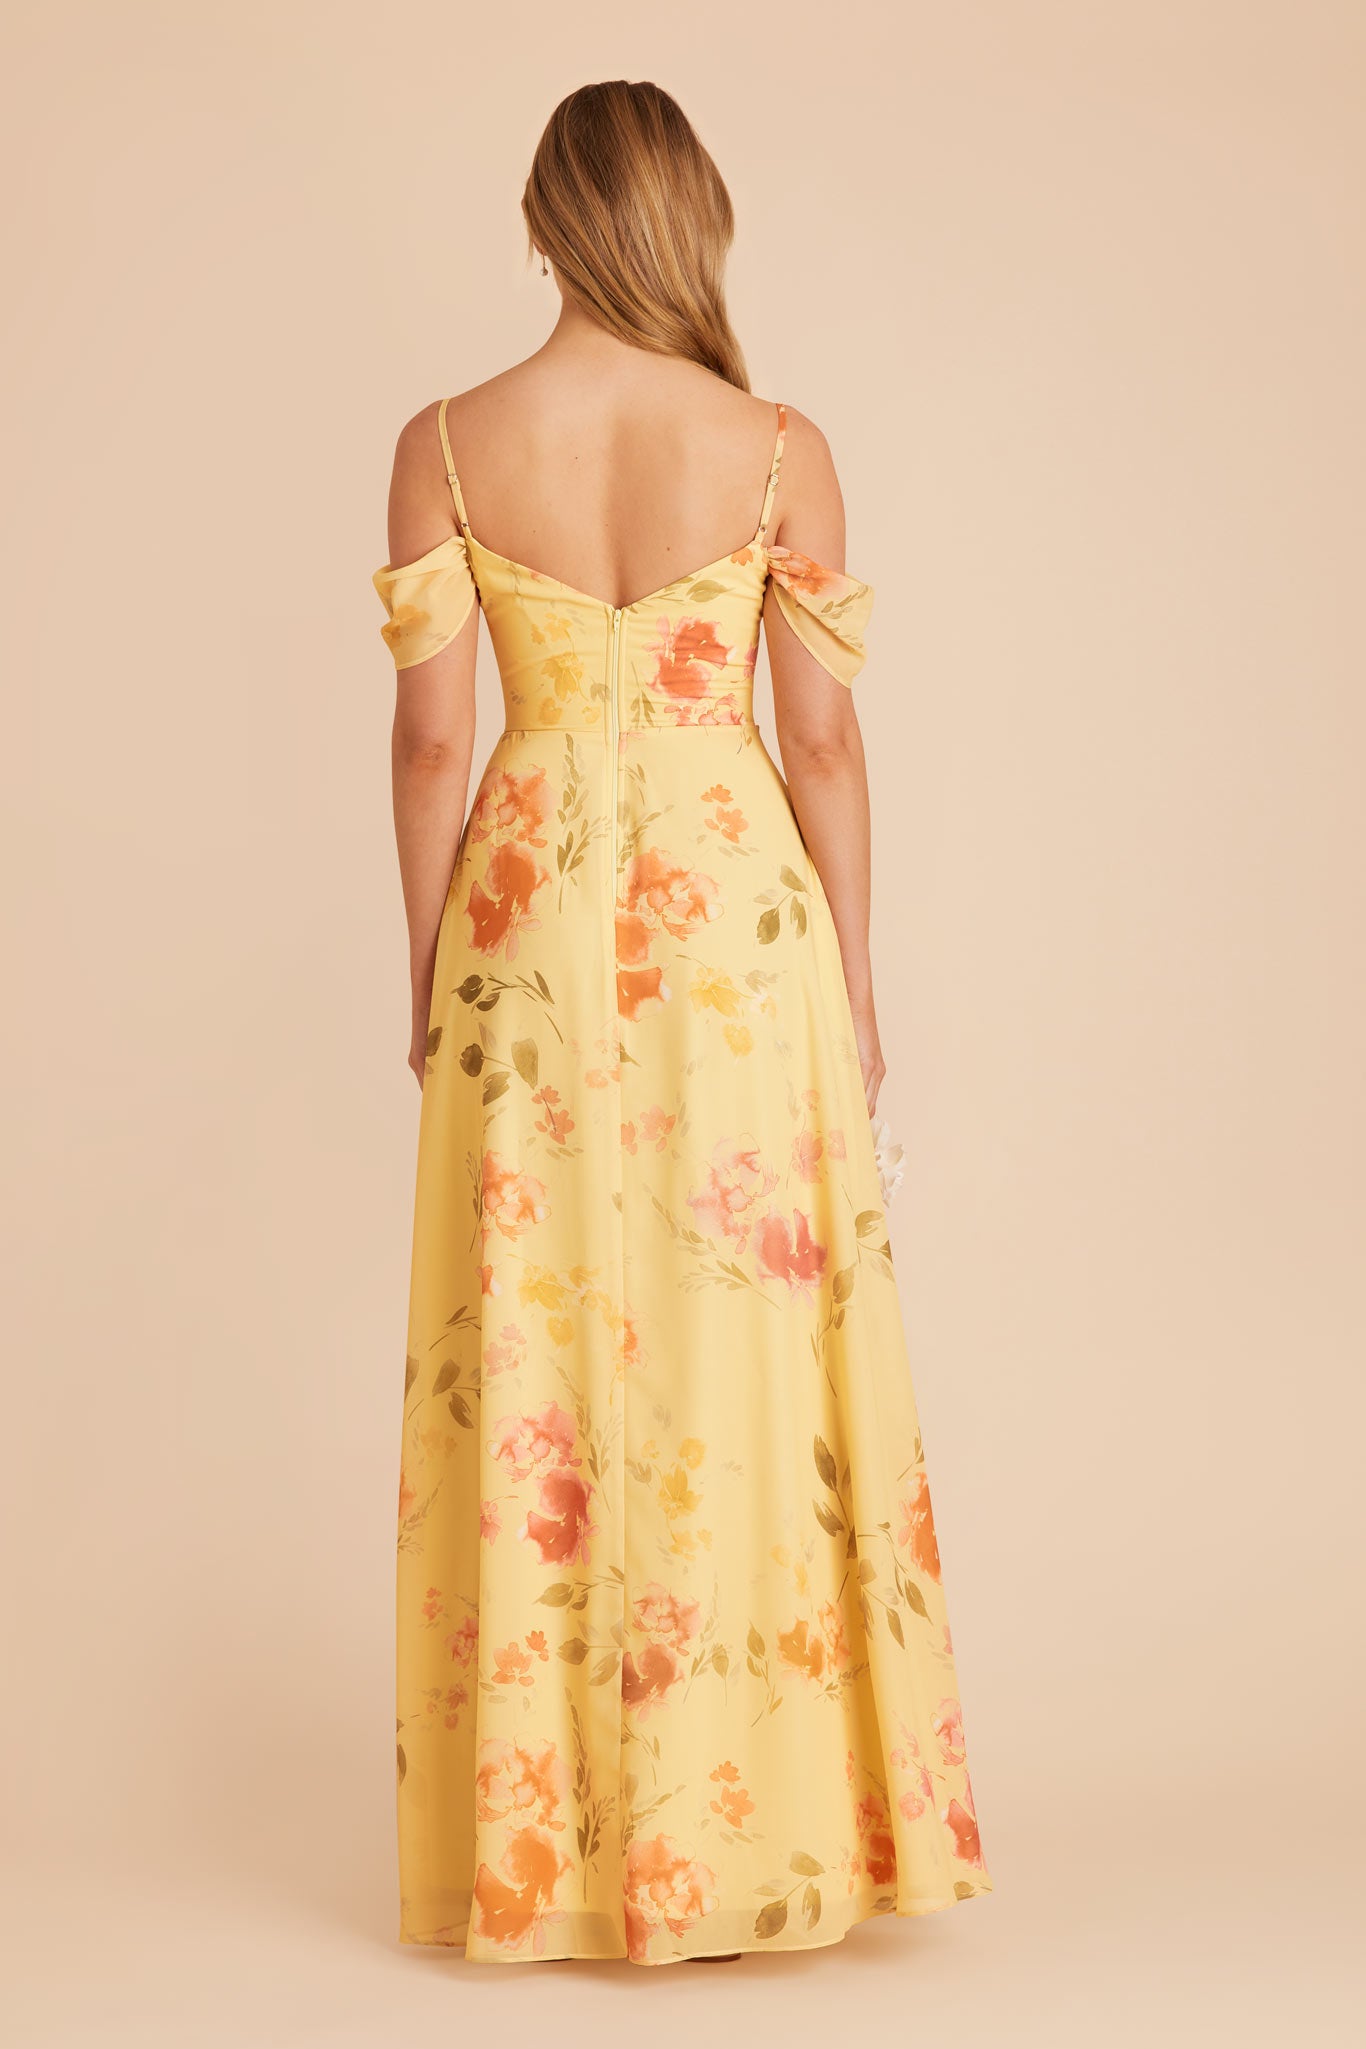 Pale Yellow Rococo Floral Devin Convertible Dress by Birdy Grey